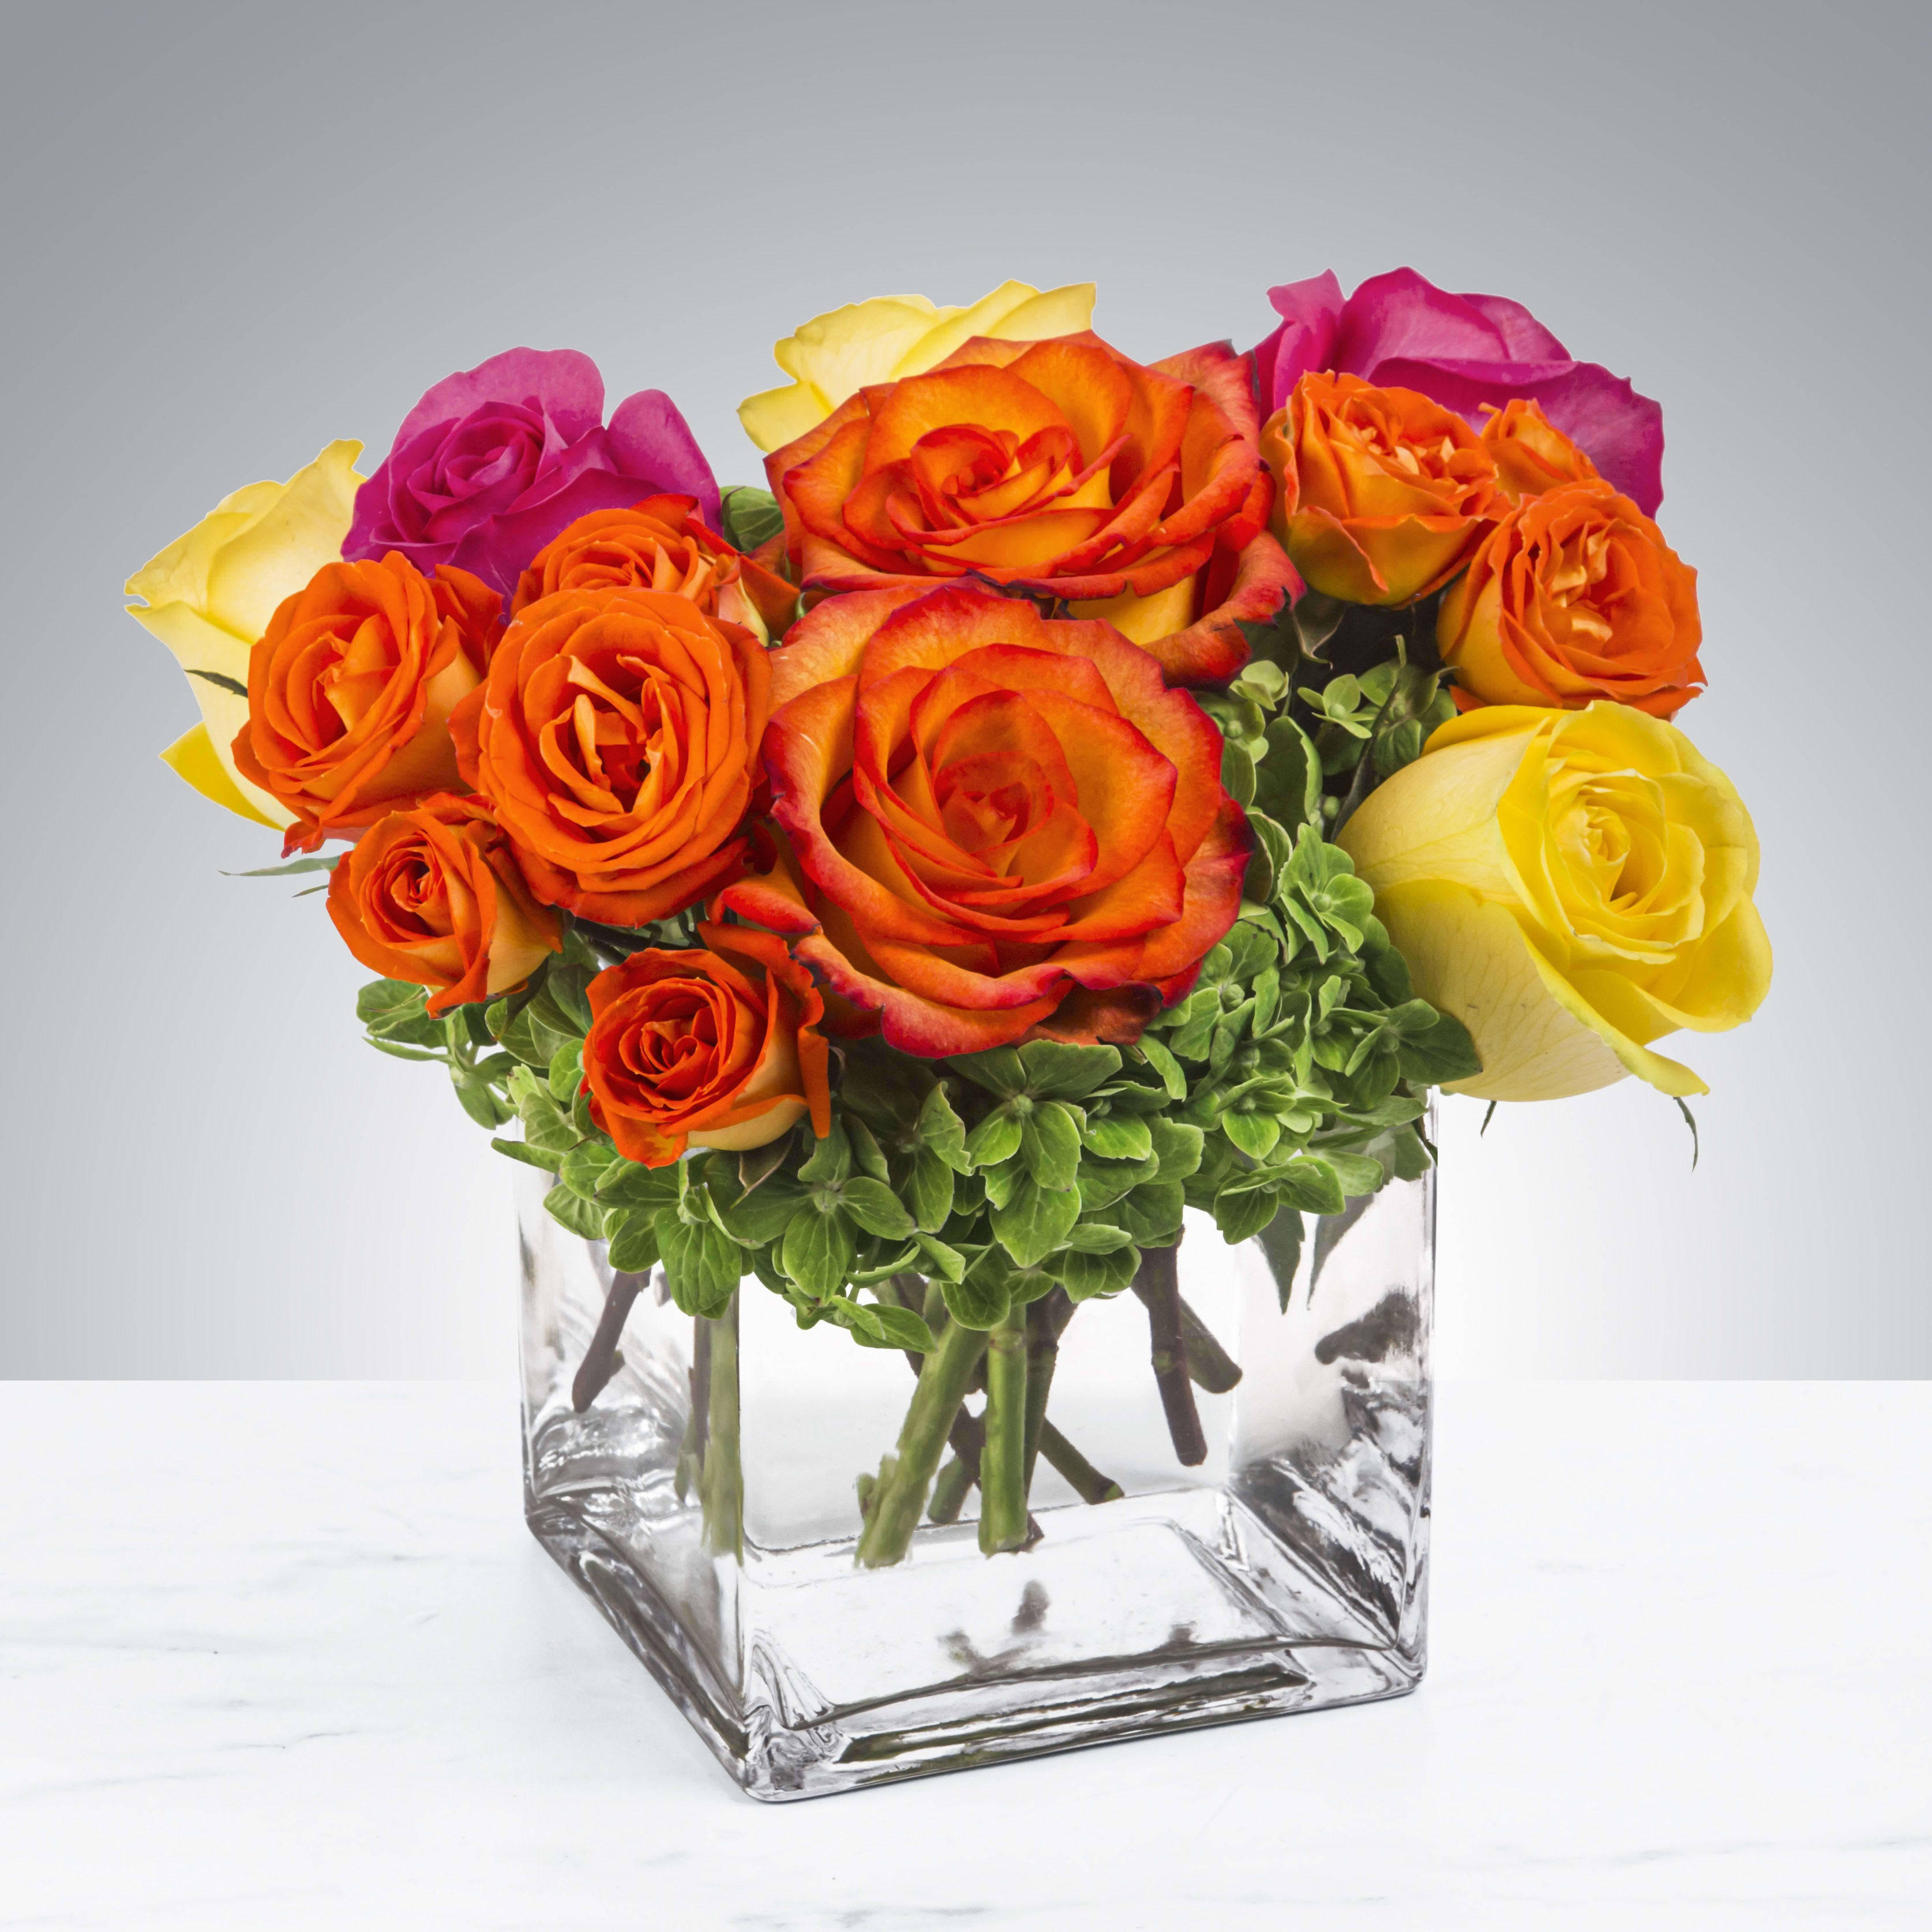 Bright Morning by BloomNation™ - Pink, yellow and orange roses come together with green hydrangea for a bright cube of sunshine. This arrangement lights up any space and will improve anybody's day. A perfect gift for all occasions.   APPROXIMATE DIMENSIONS 10&quot; W X 13&quot; H APPROXIMATE DIMENSIONS 12&quot; W X 16&quot; H APPROXIMATE DIMENSIONS 15&quot; W X 18&quot; H